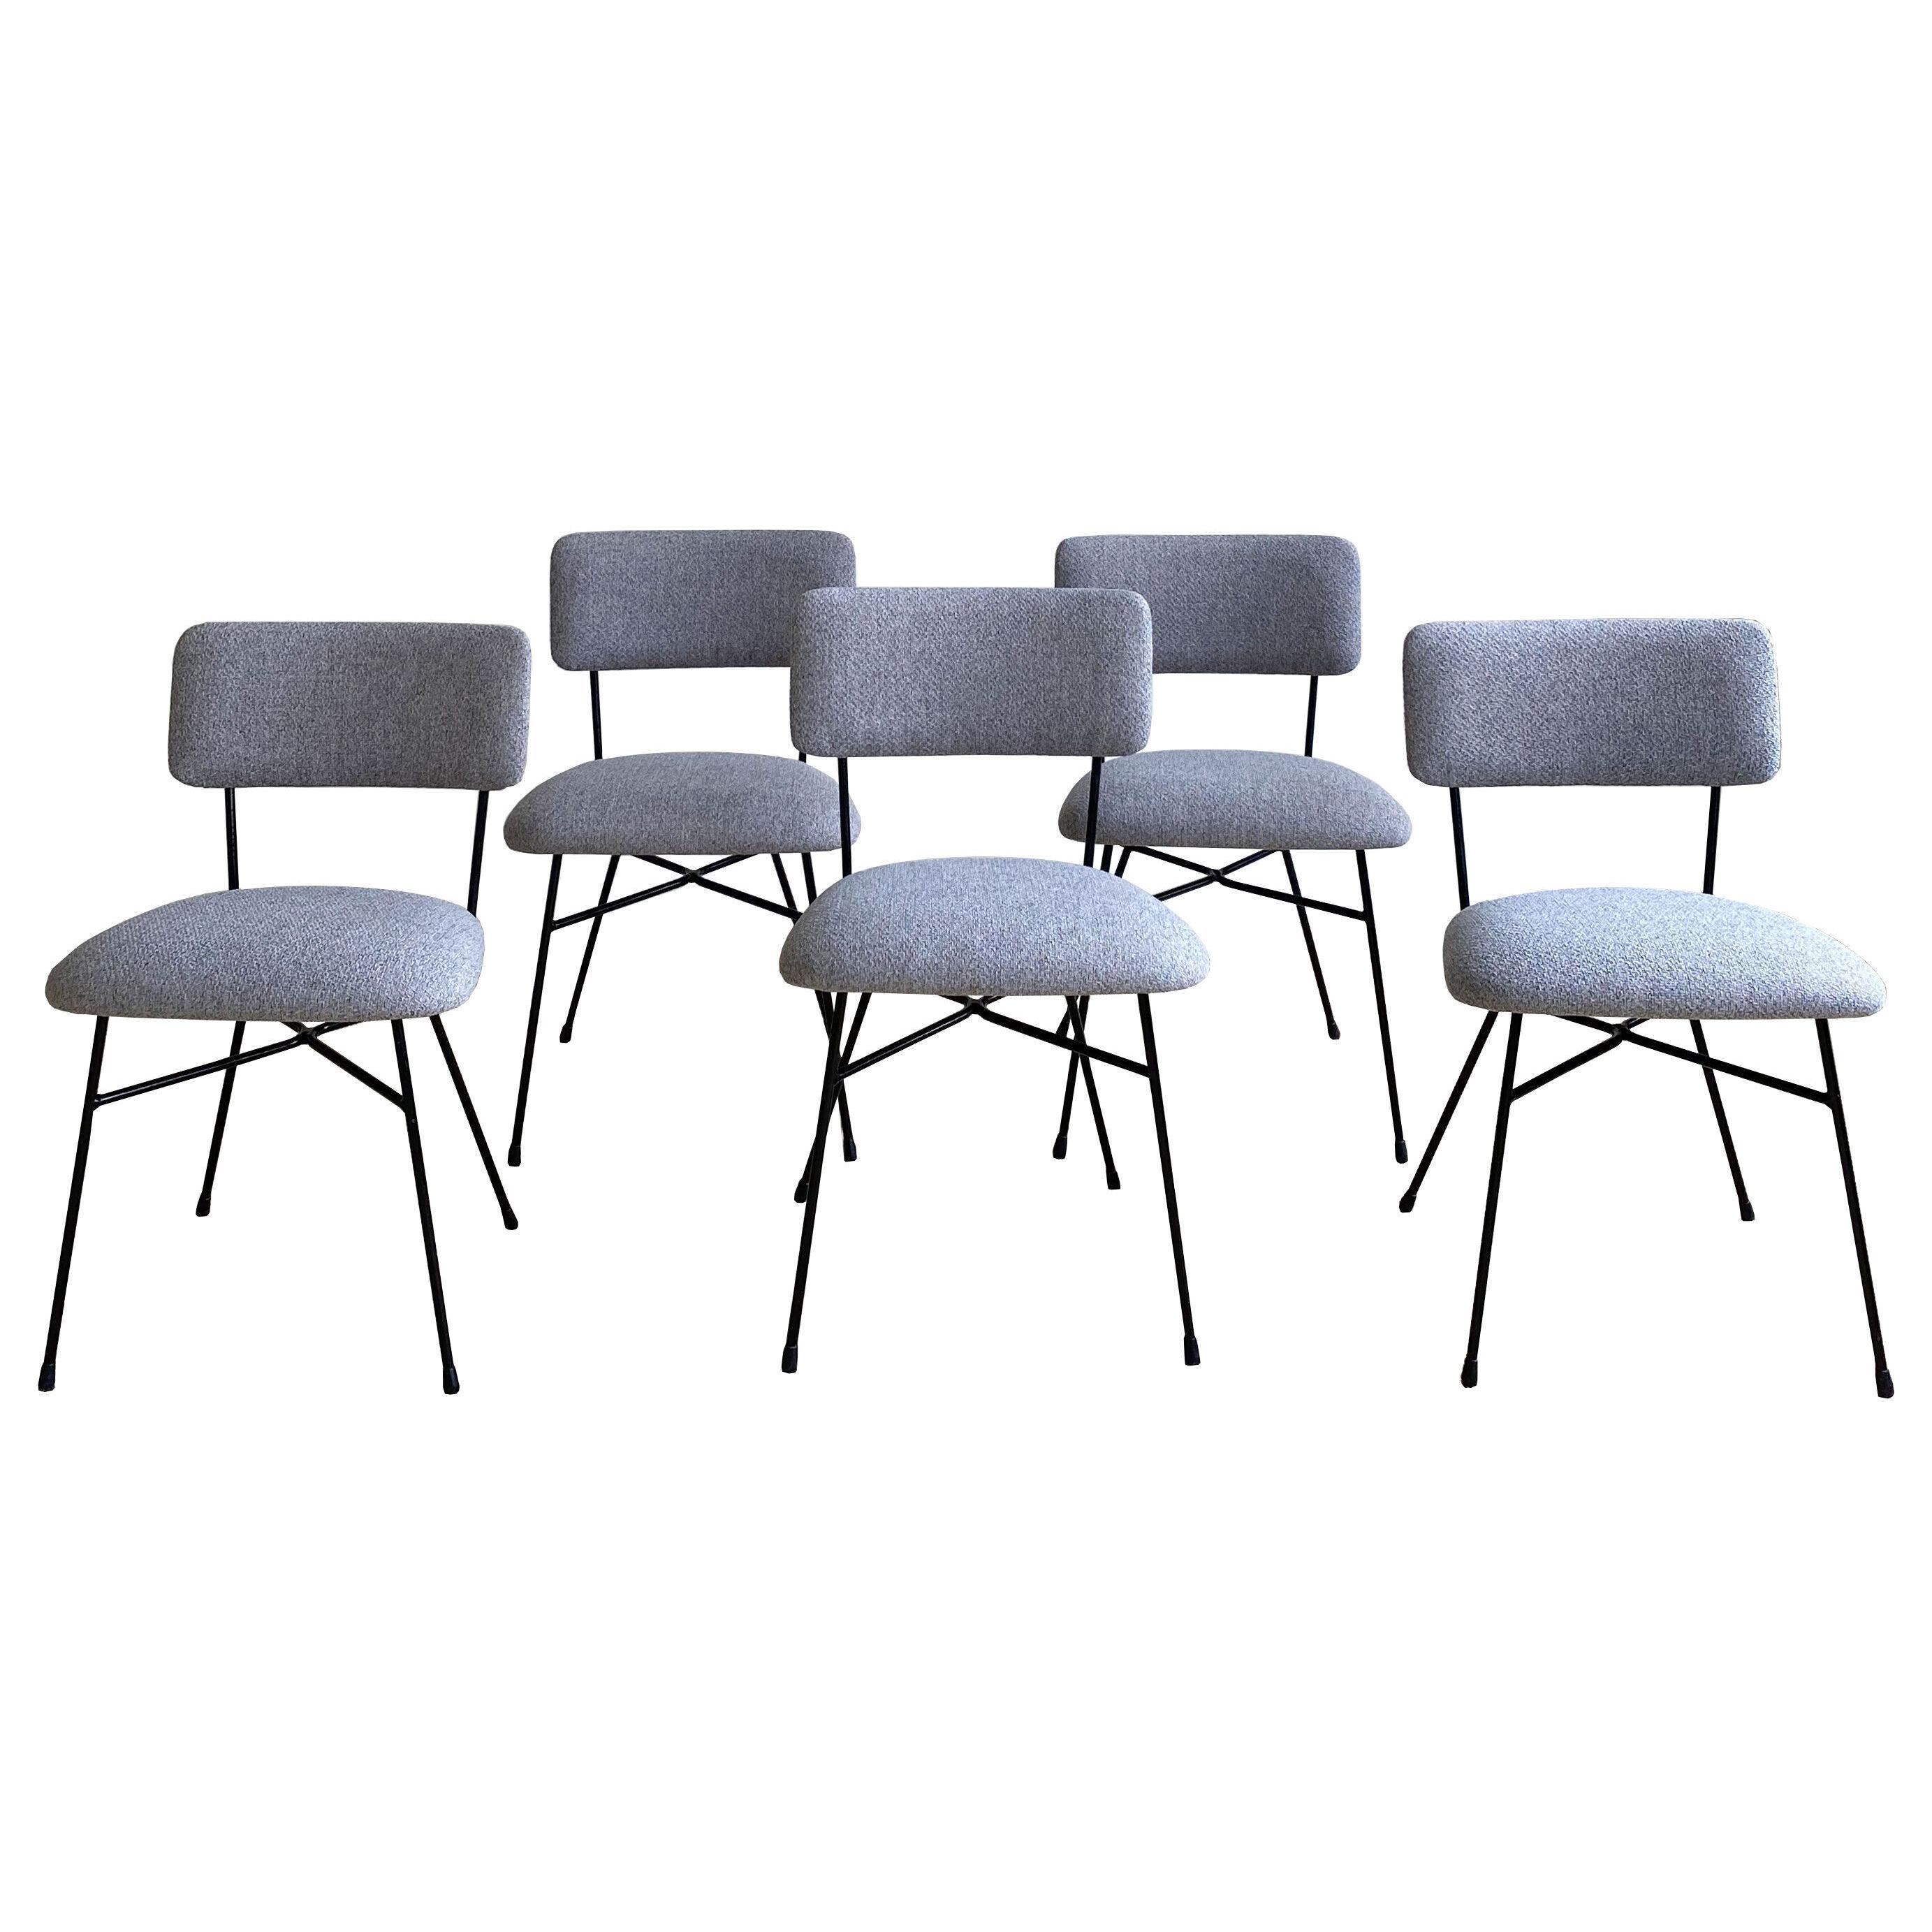 Set of Five BBPR 'Elettra' Chairs